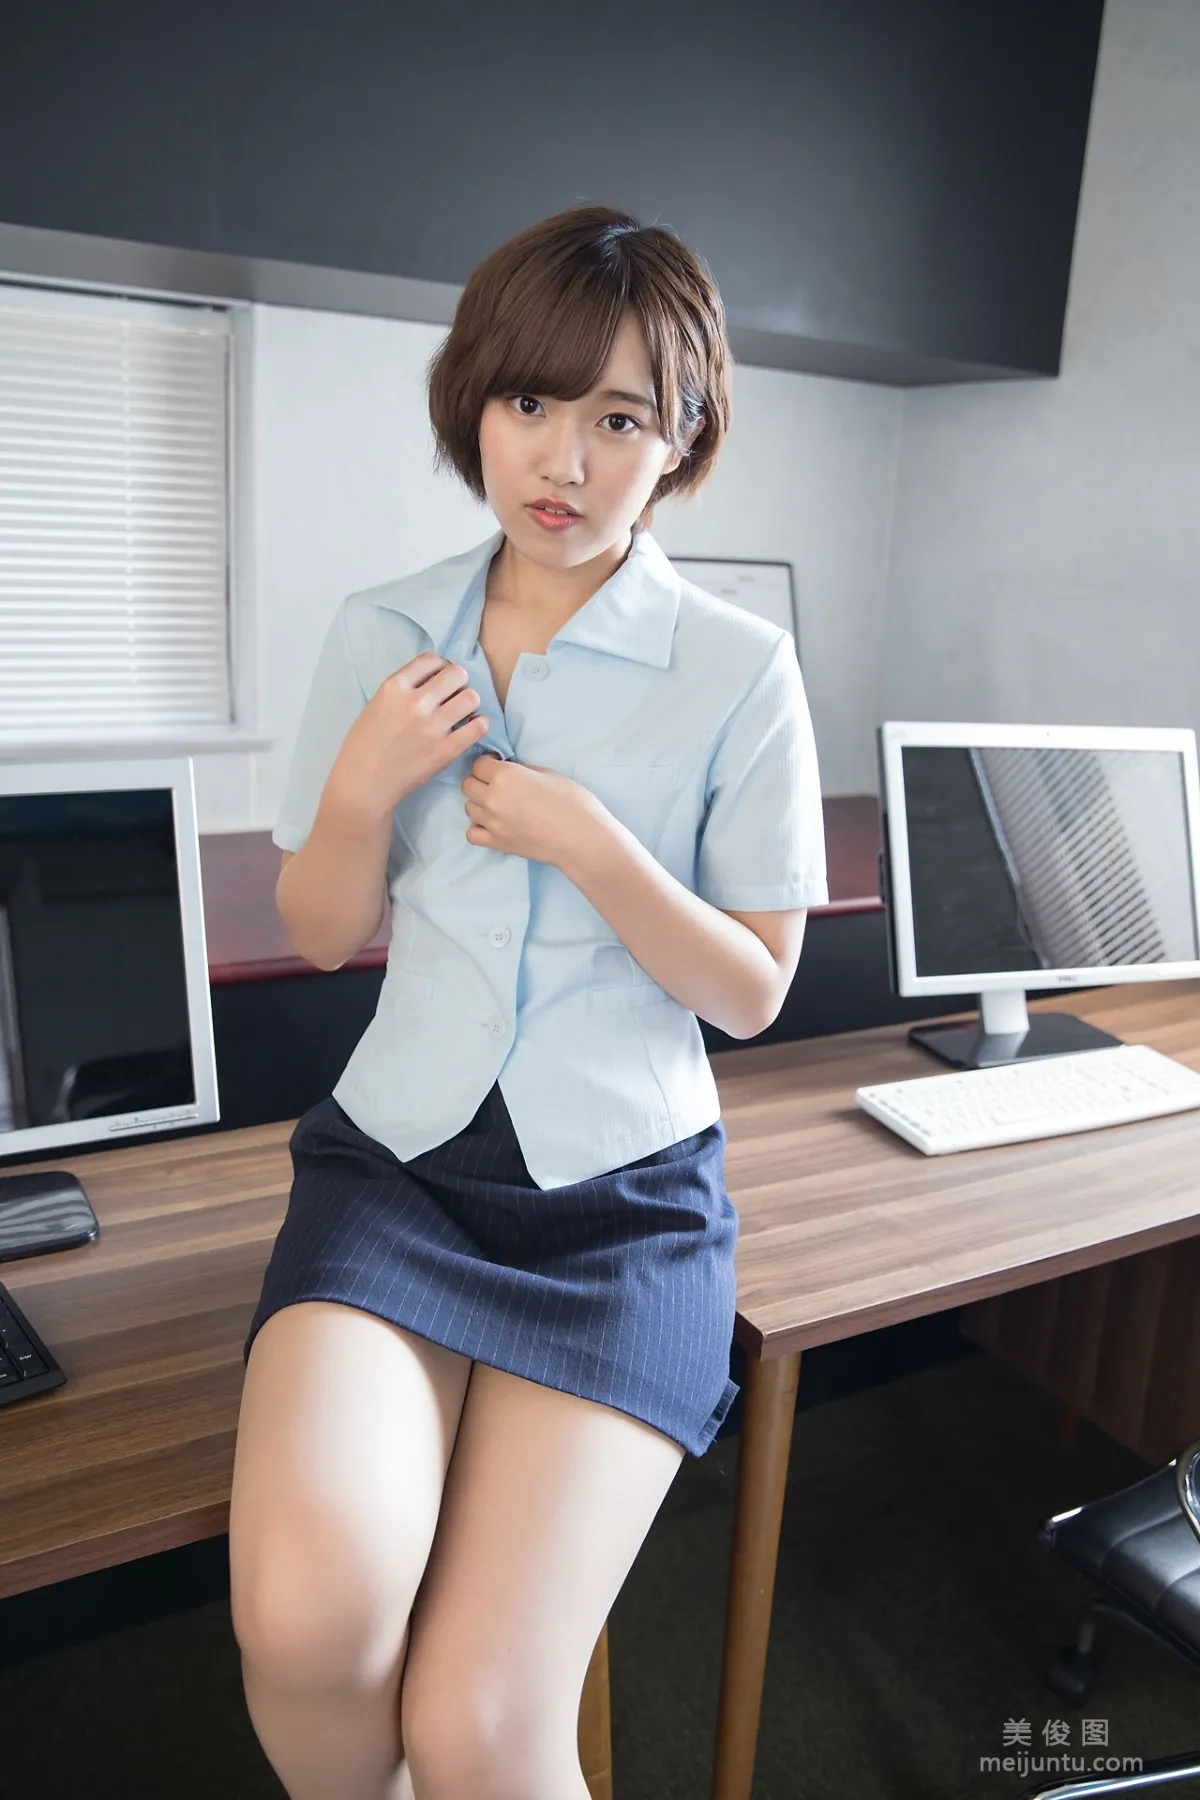 [Minisuka.tv] 香月りお - Special Gallery 12.17